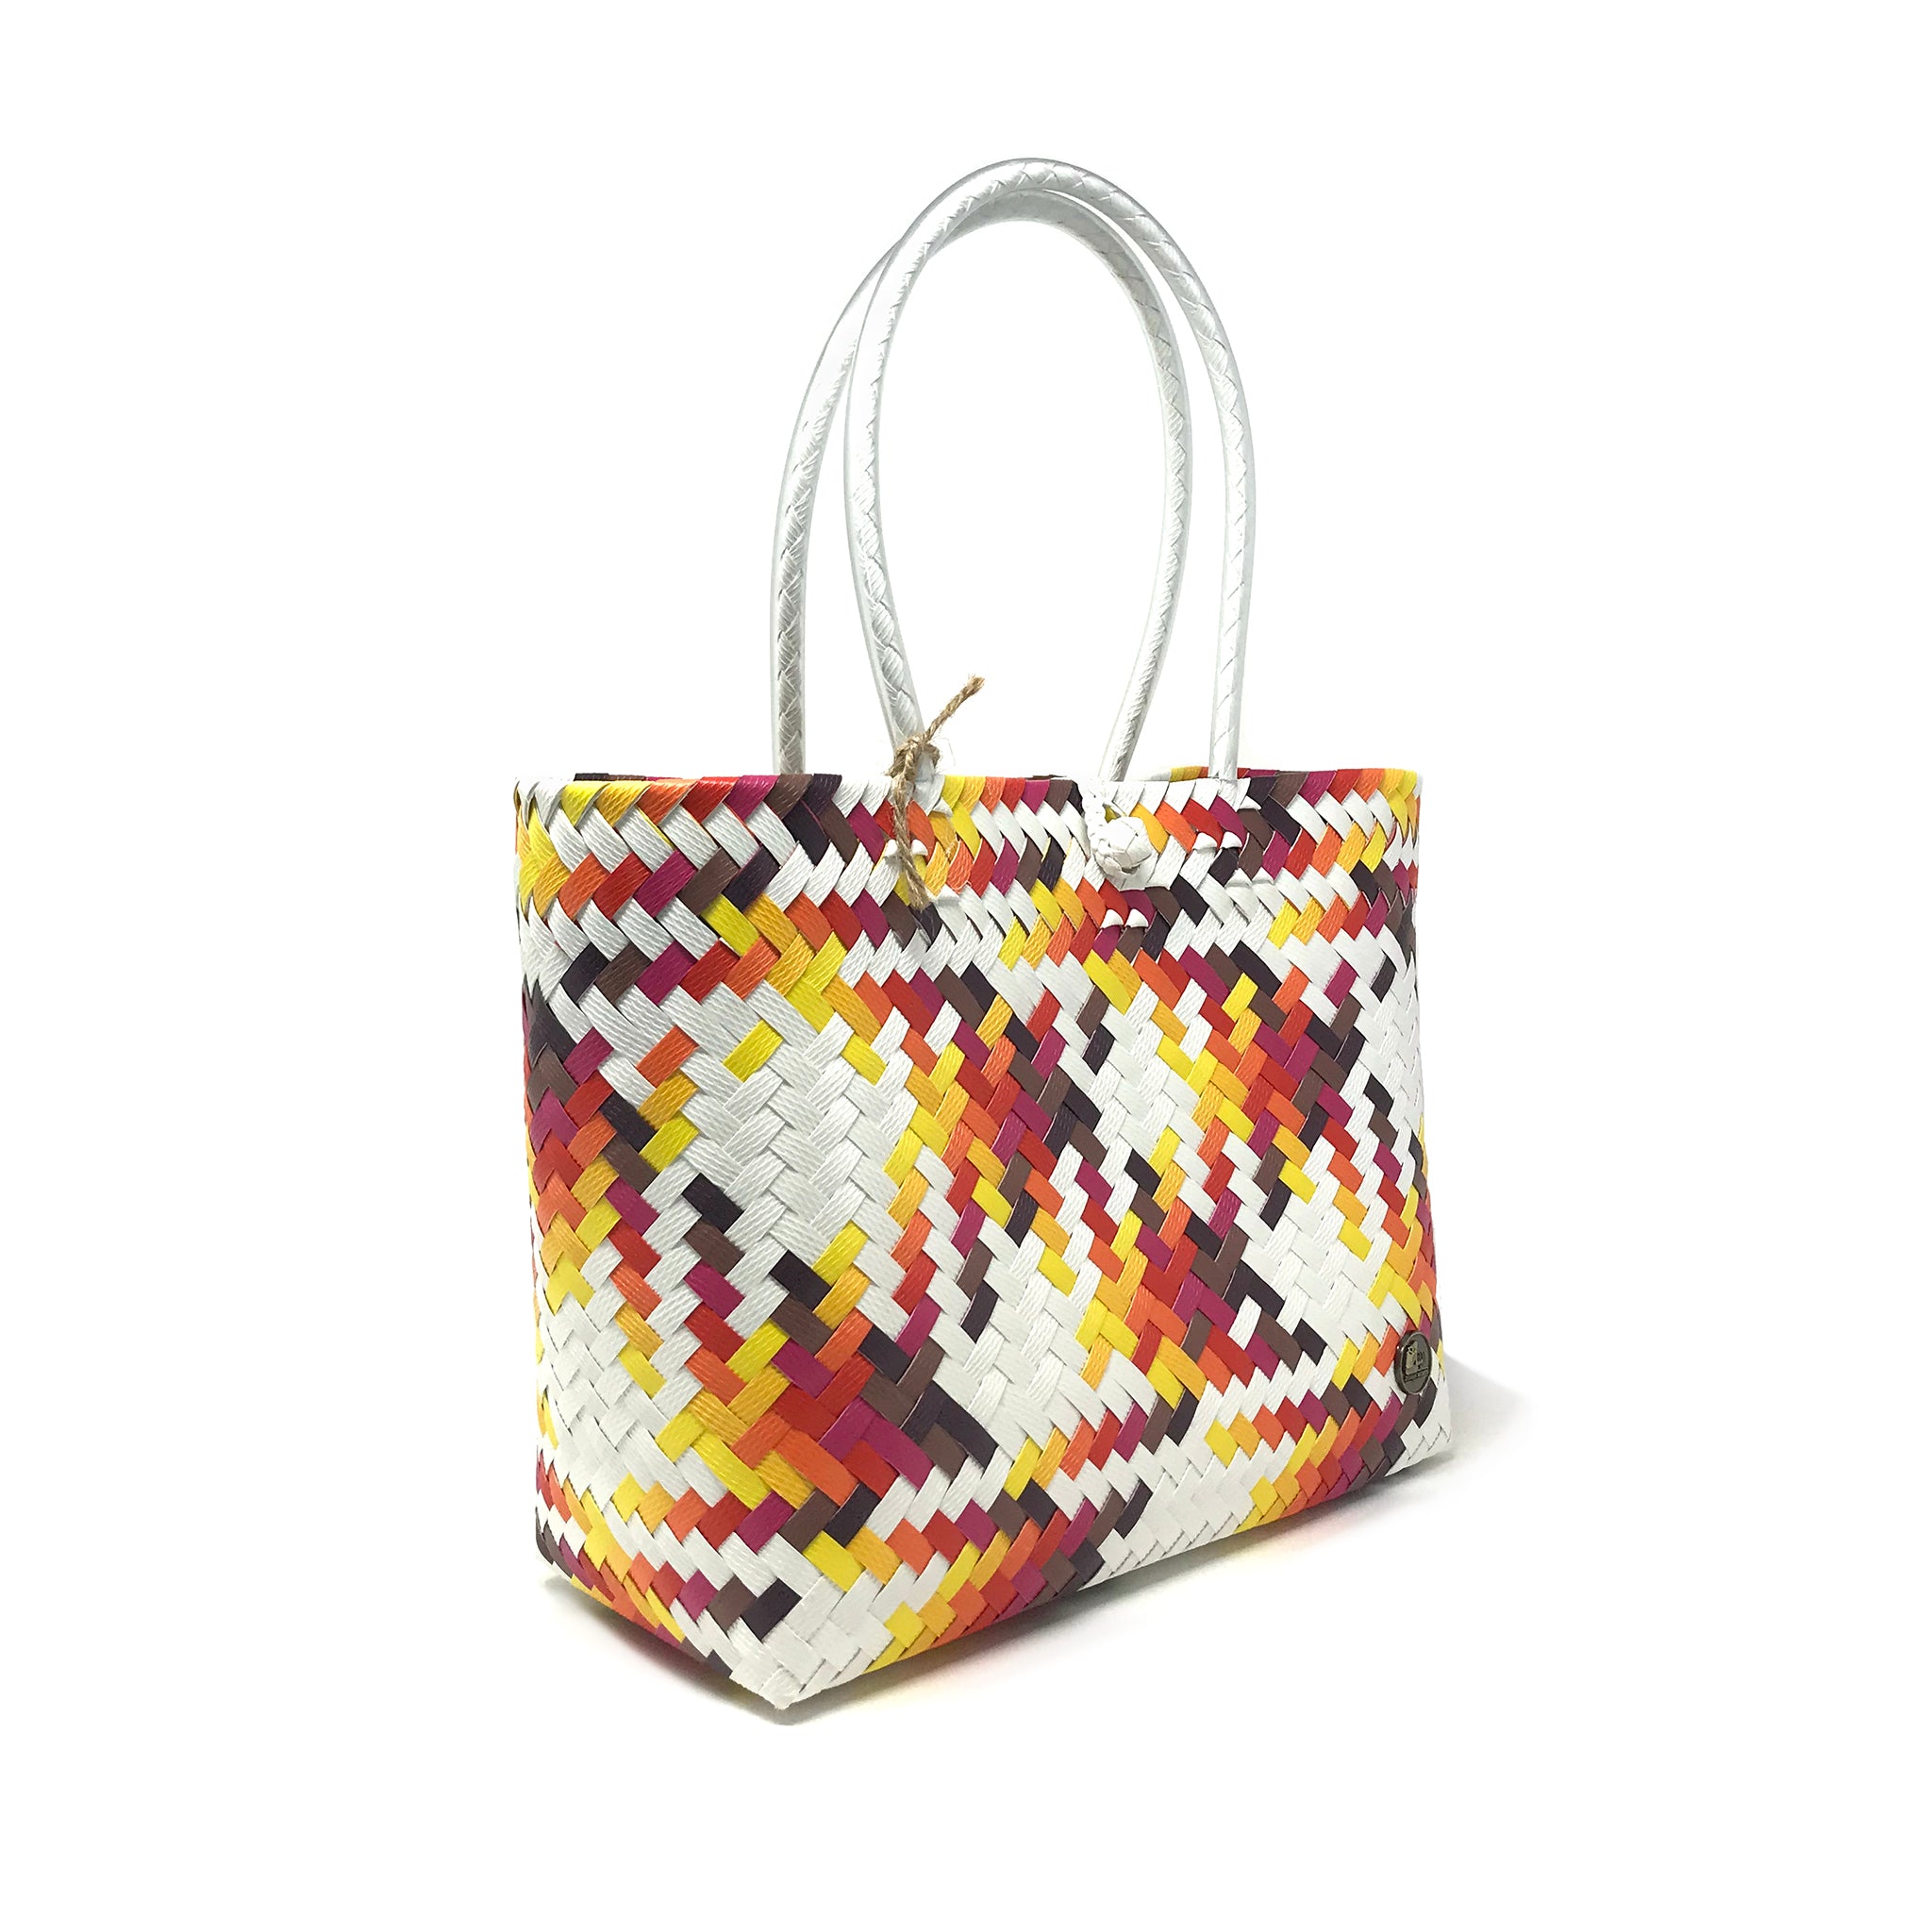 Red, yellow and white small size tote bag at a 45-degree angle.